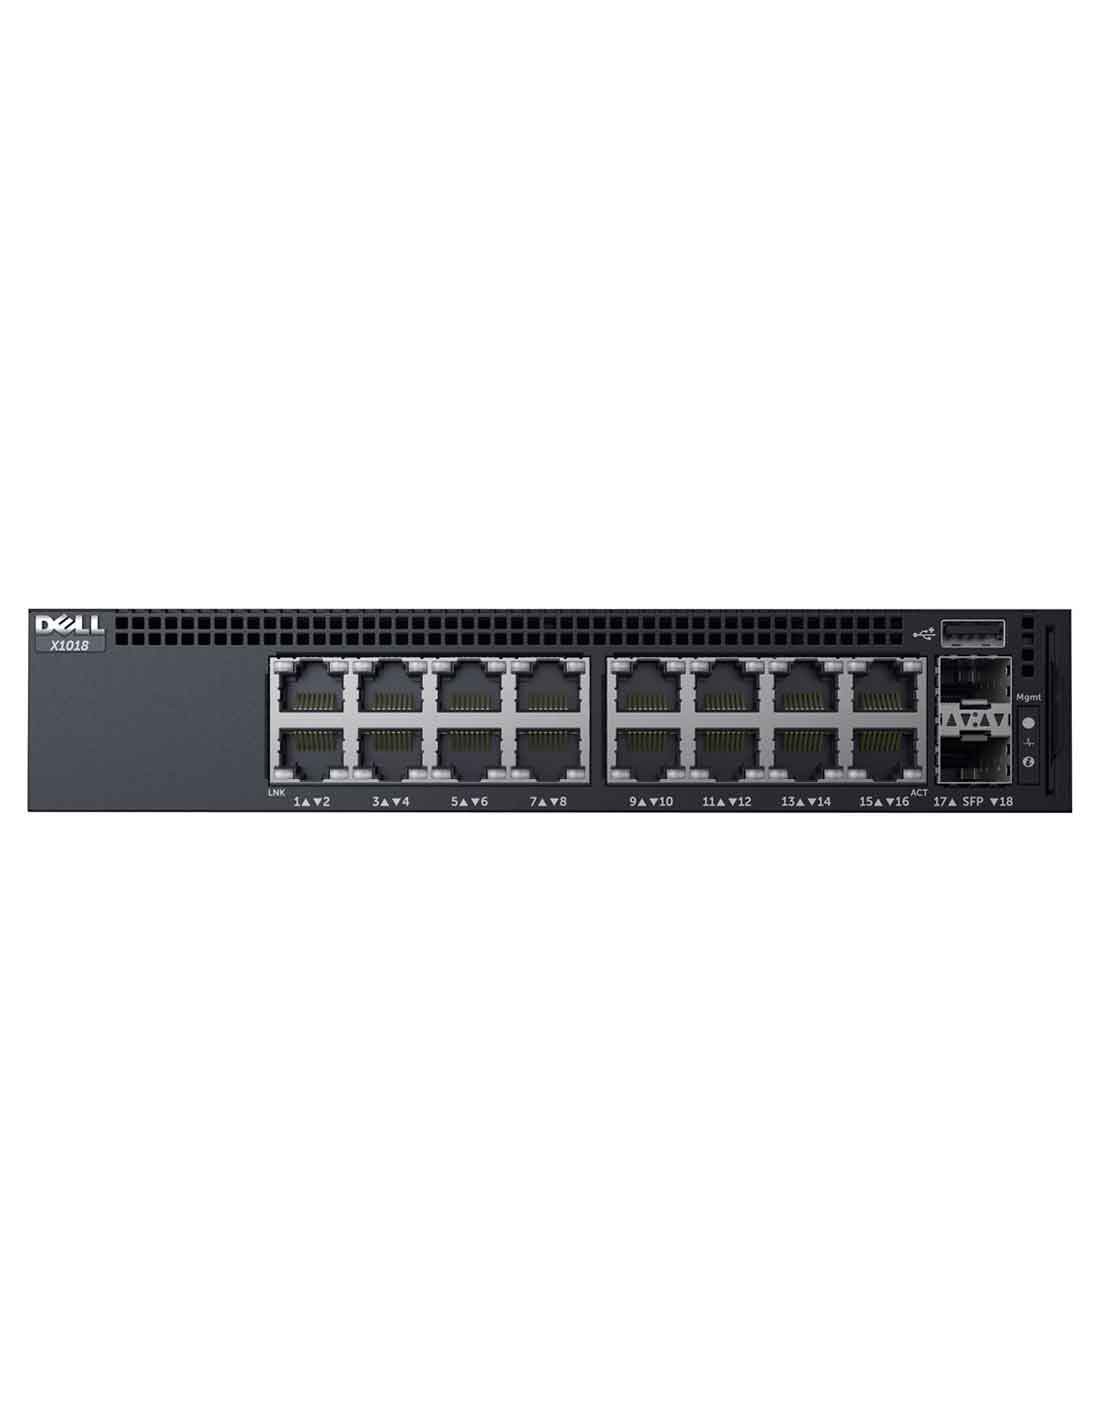 Dell Networking X1018 Managed Switch at the cheapest price and fast free delivery in Dubai UAE